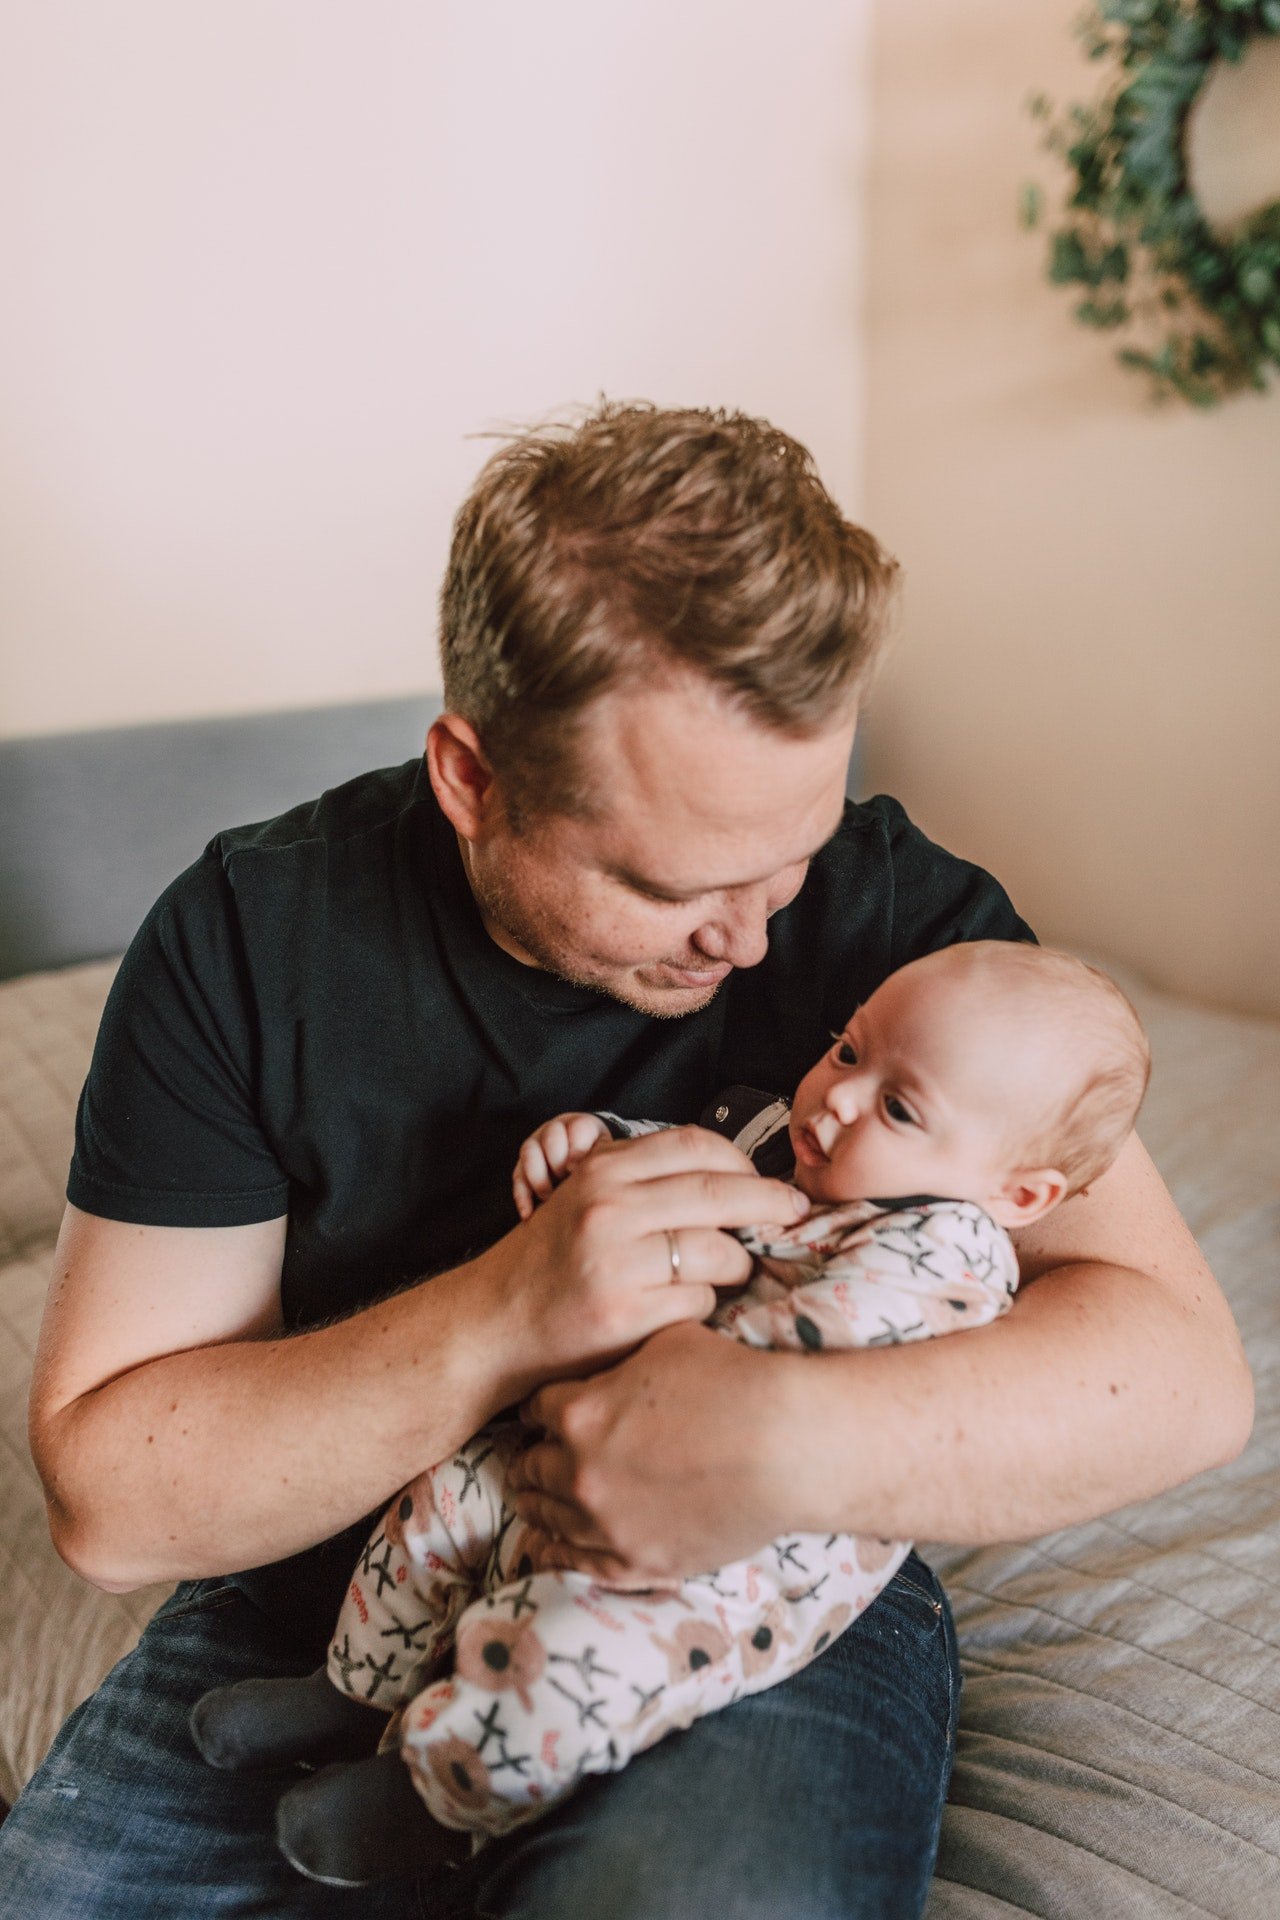 After the child stopped crying, and even though he didn't plan to, Paul fell in love with the little girl | Source: Pexels